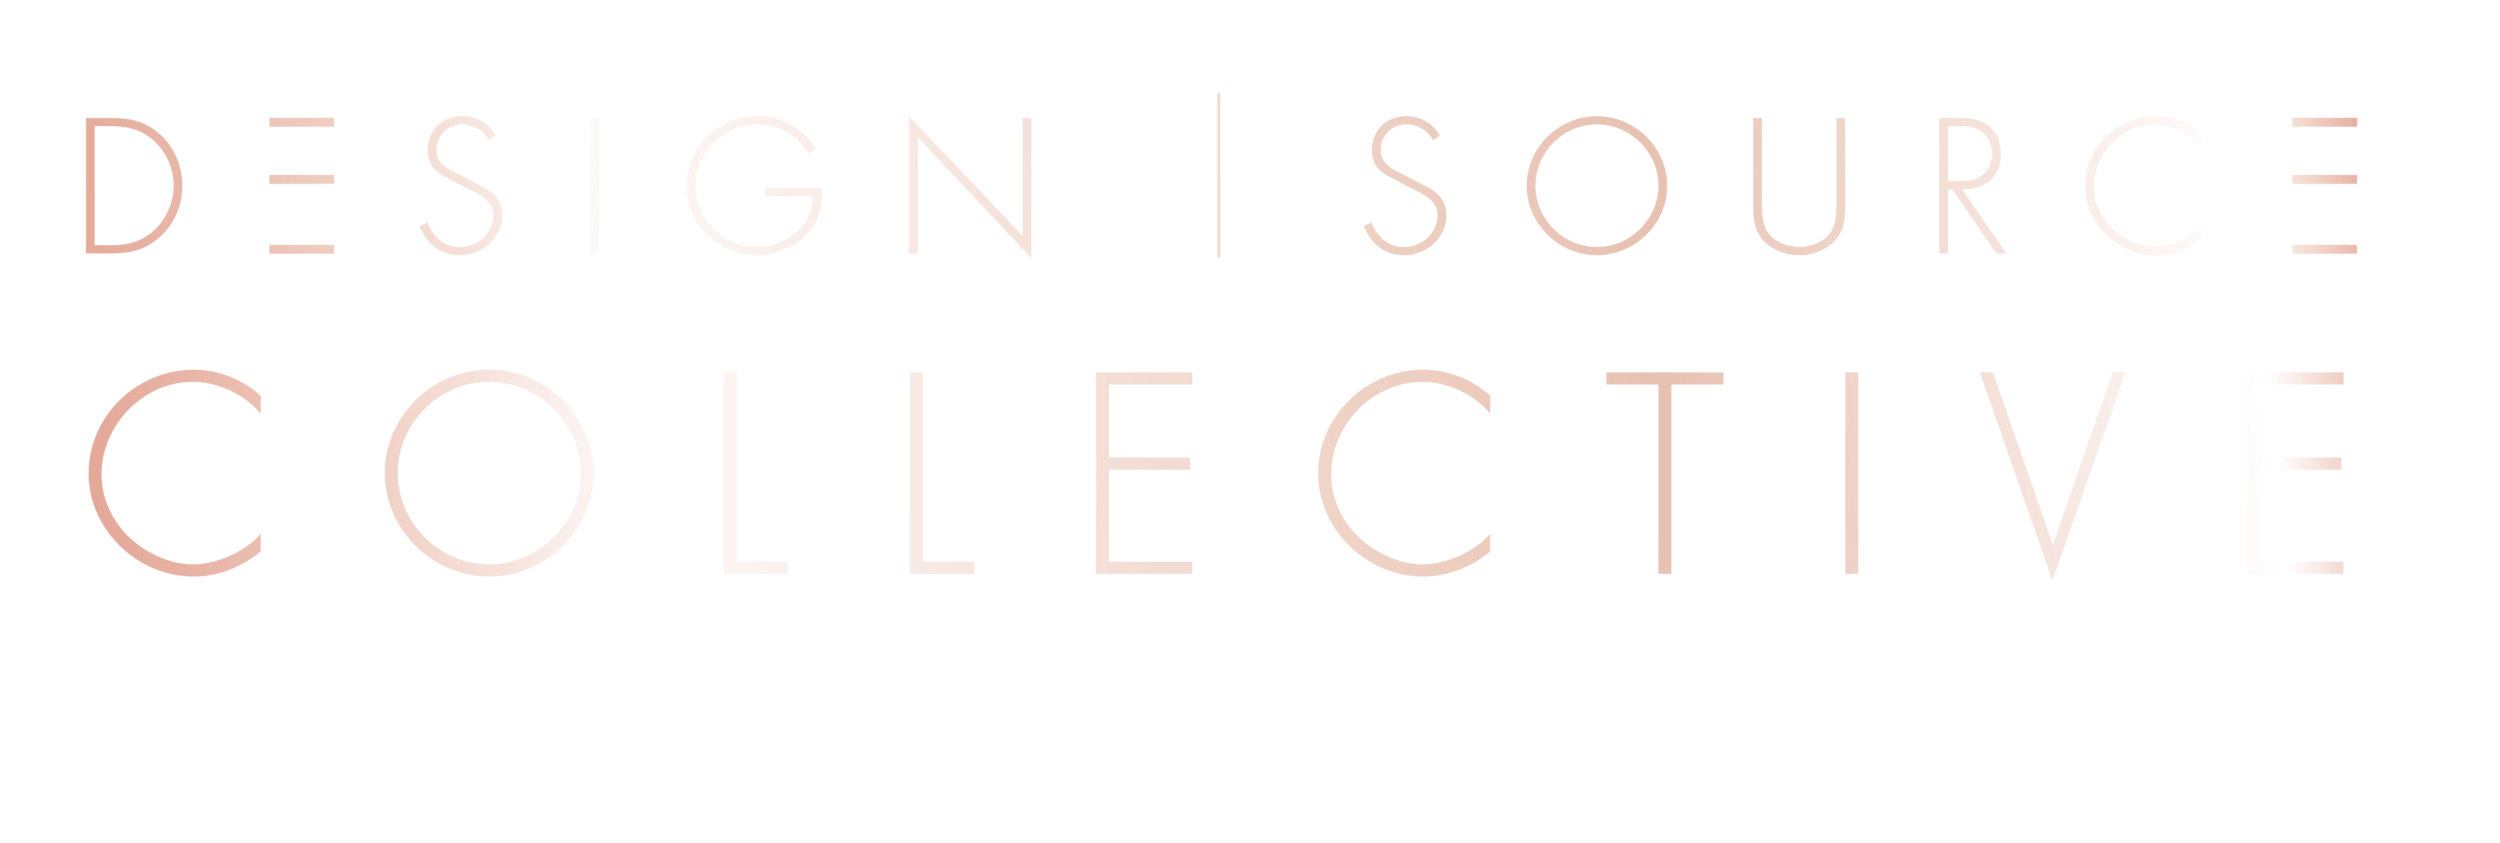 DESIGN SOURCE COLLECTIVE